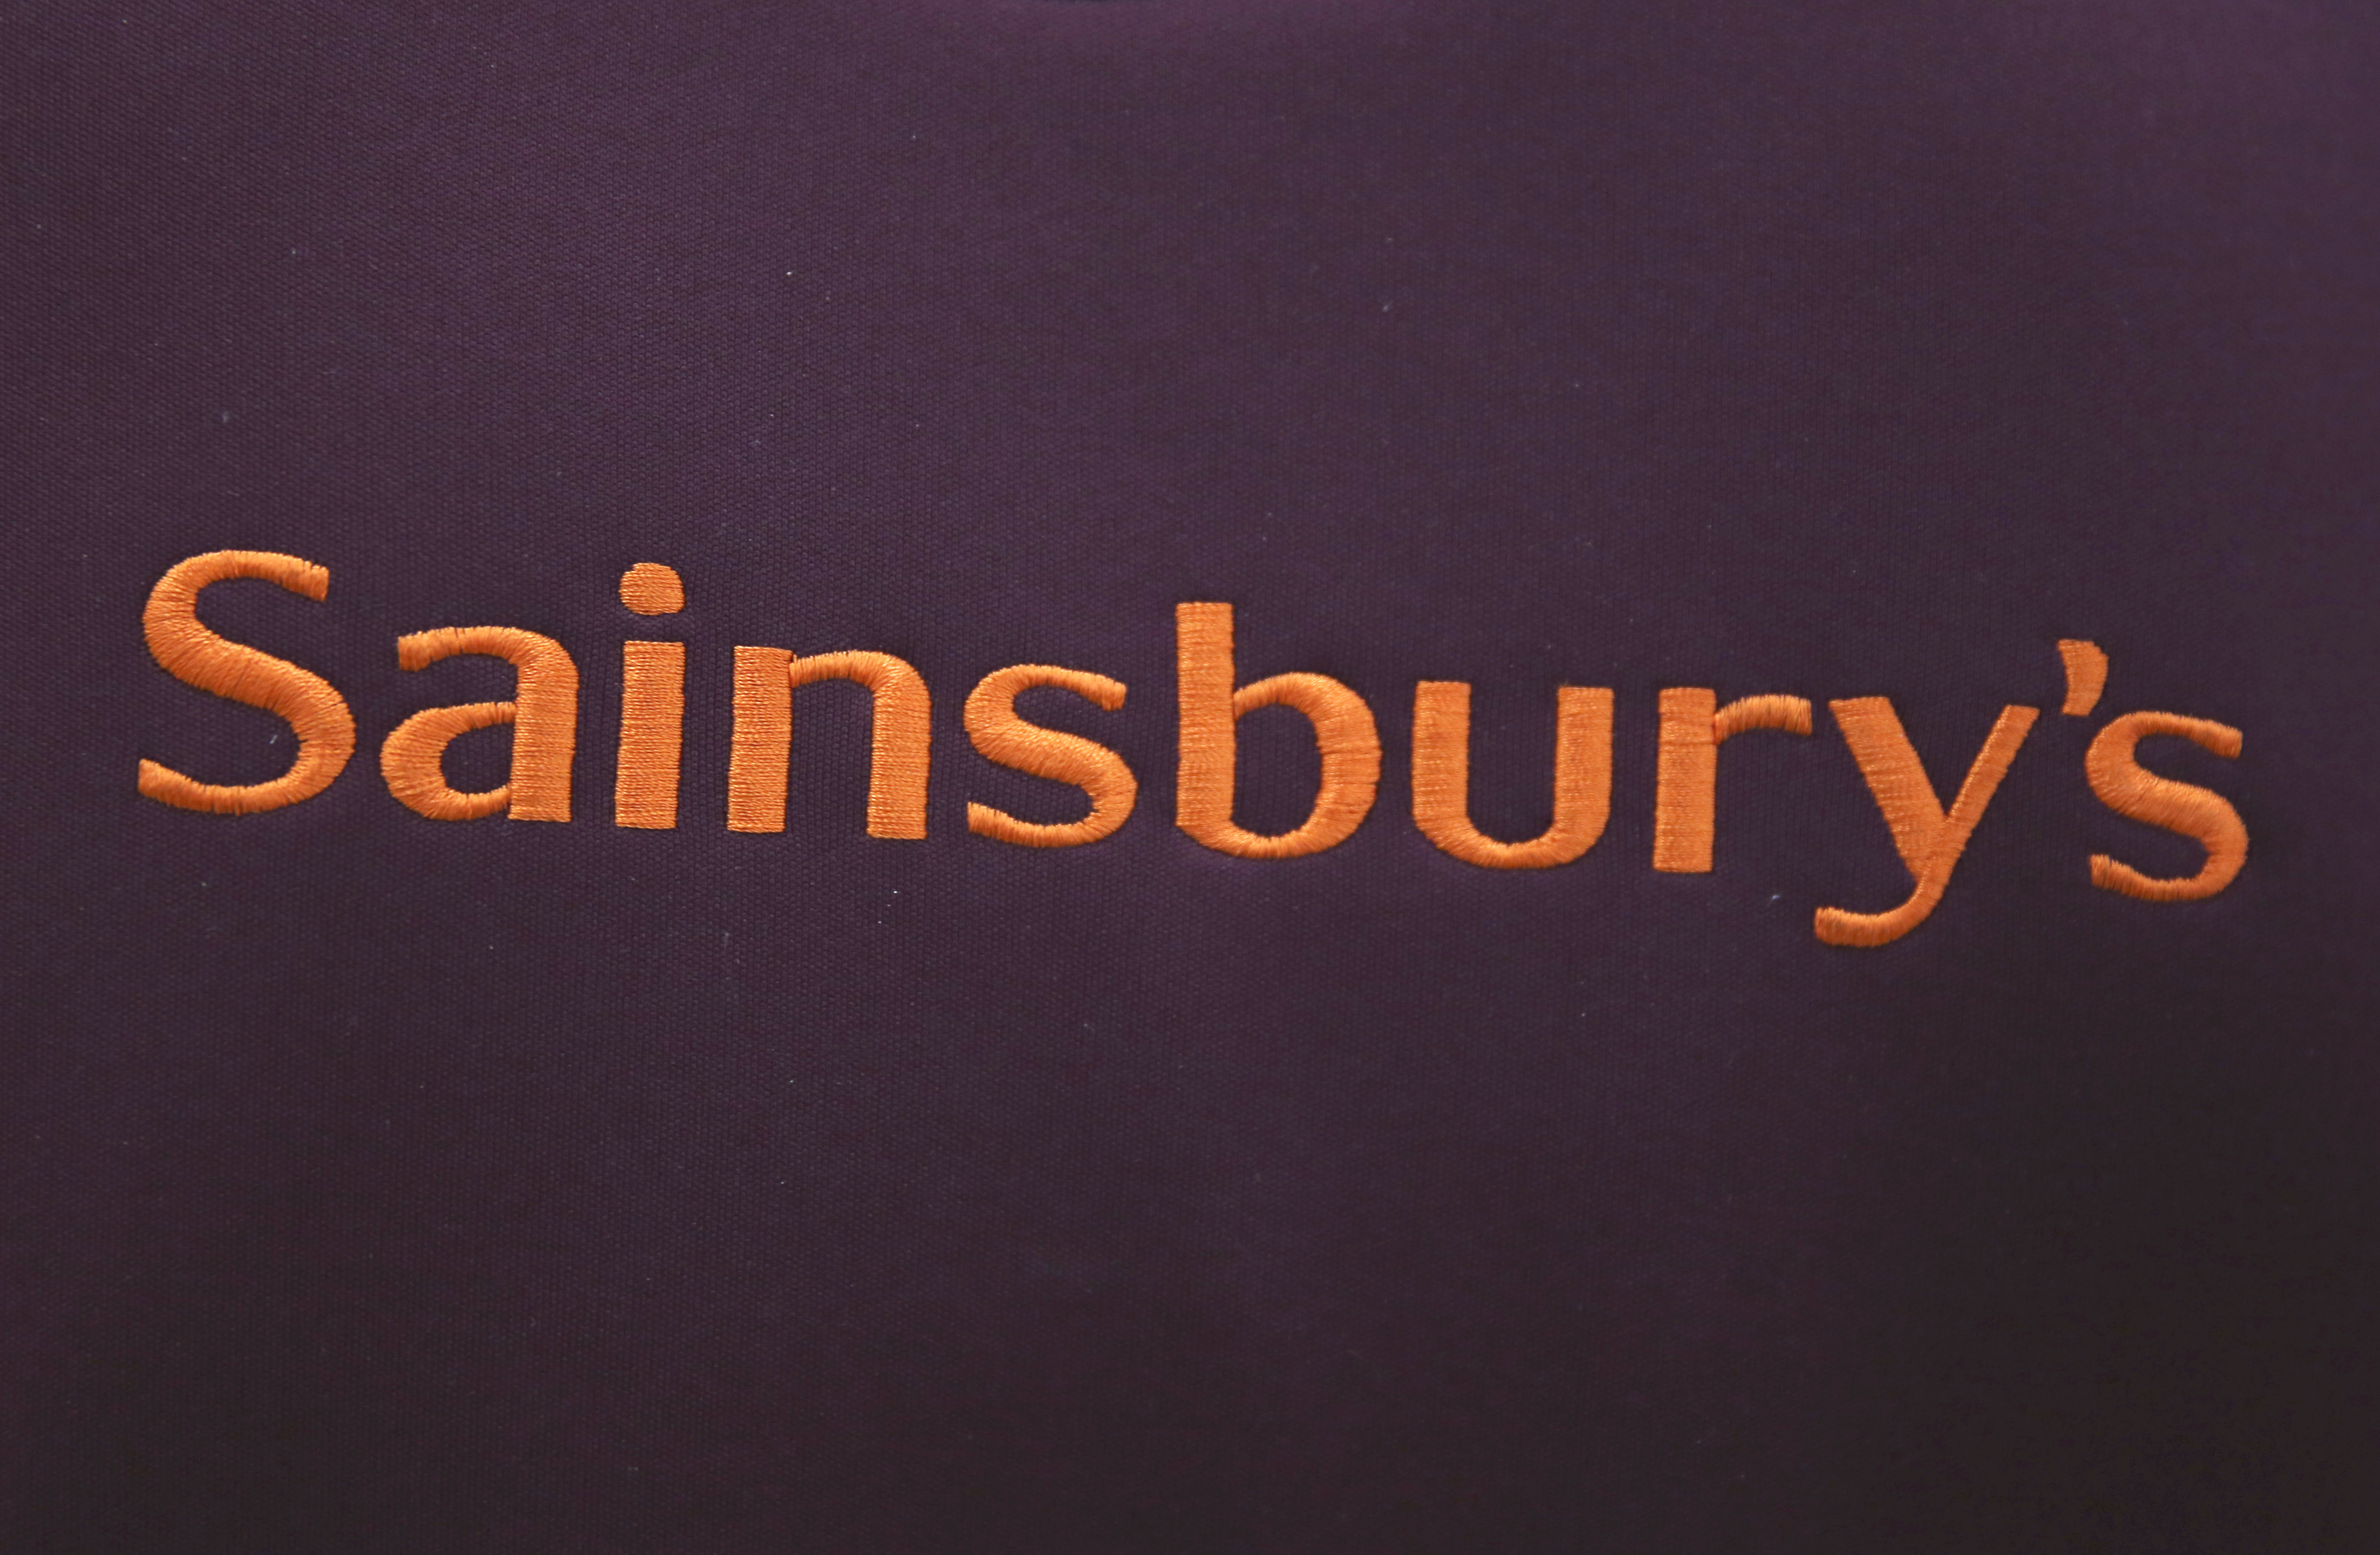 A worker's uniform displays company branding at a Sainsbury's store in London